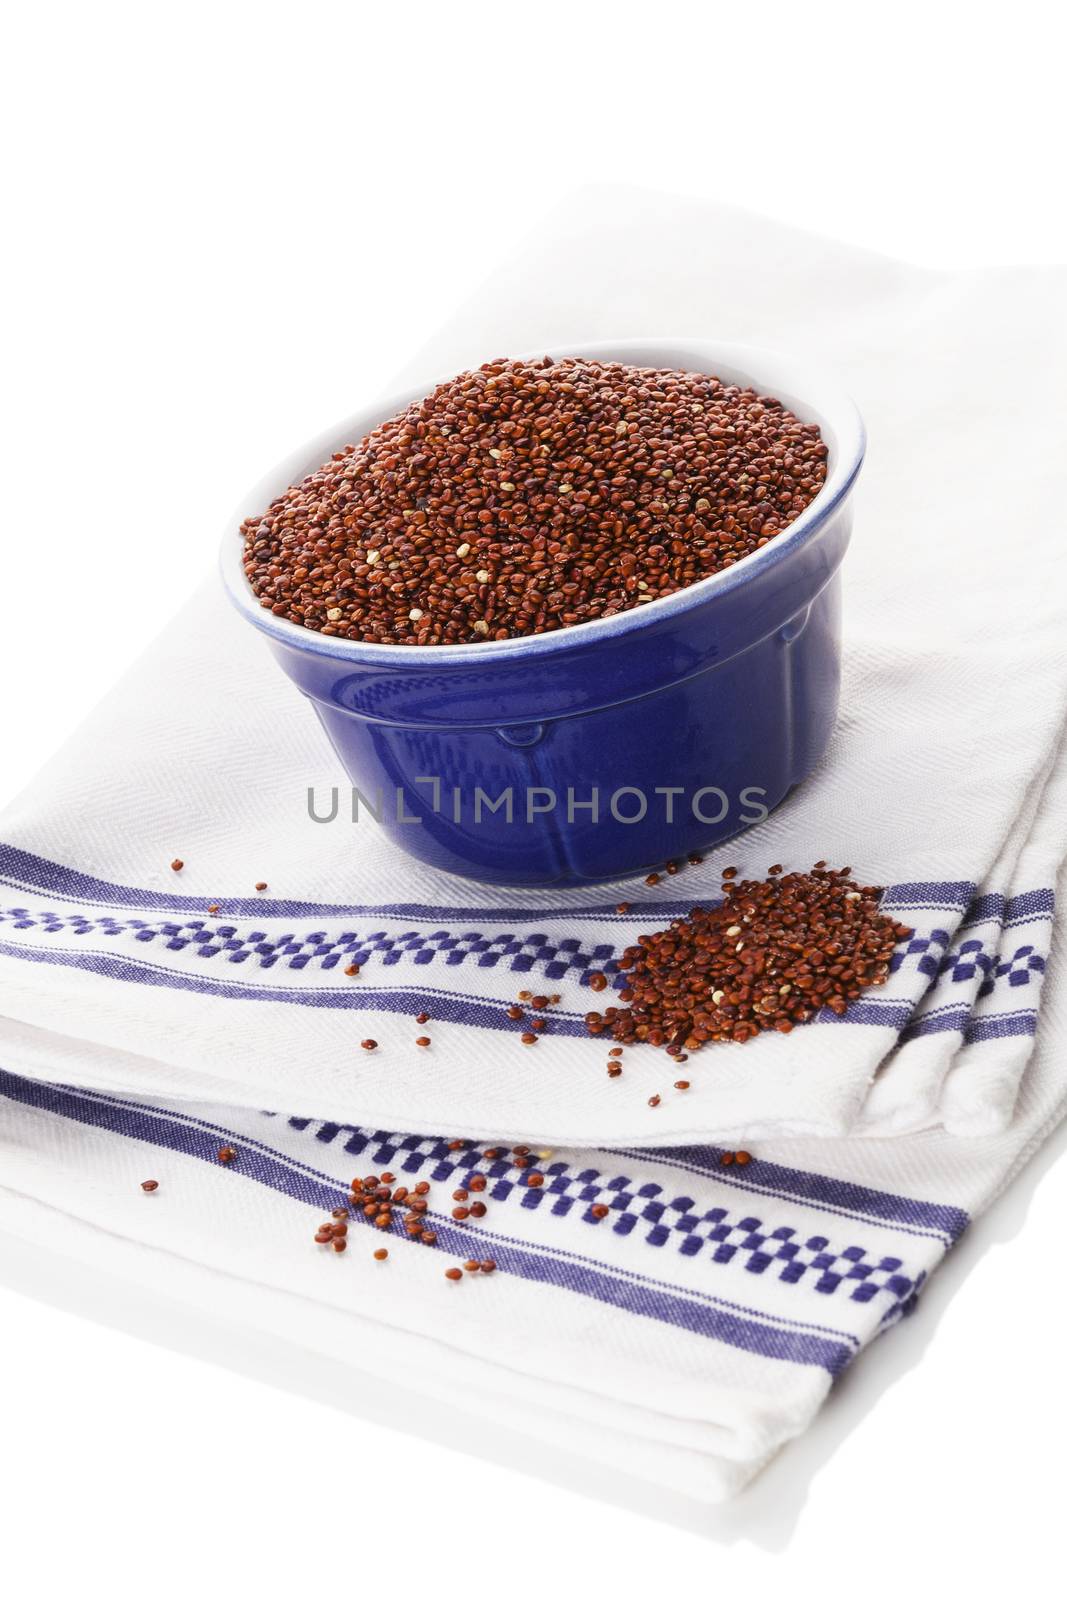 Red Quinoa seeds. by eskymaks